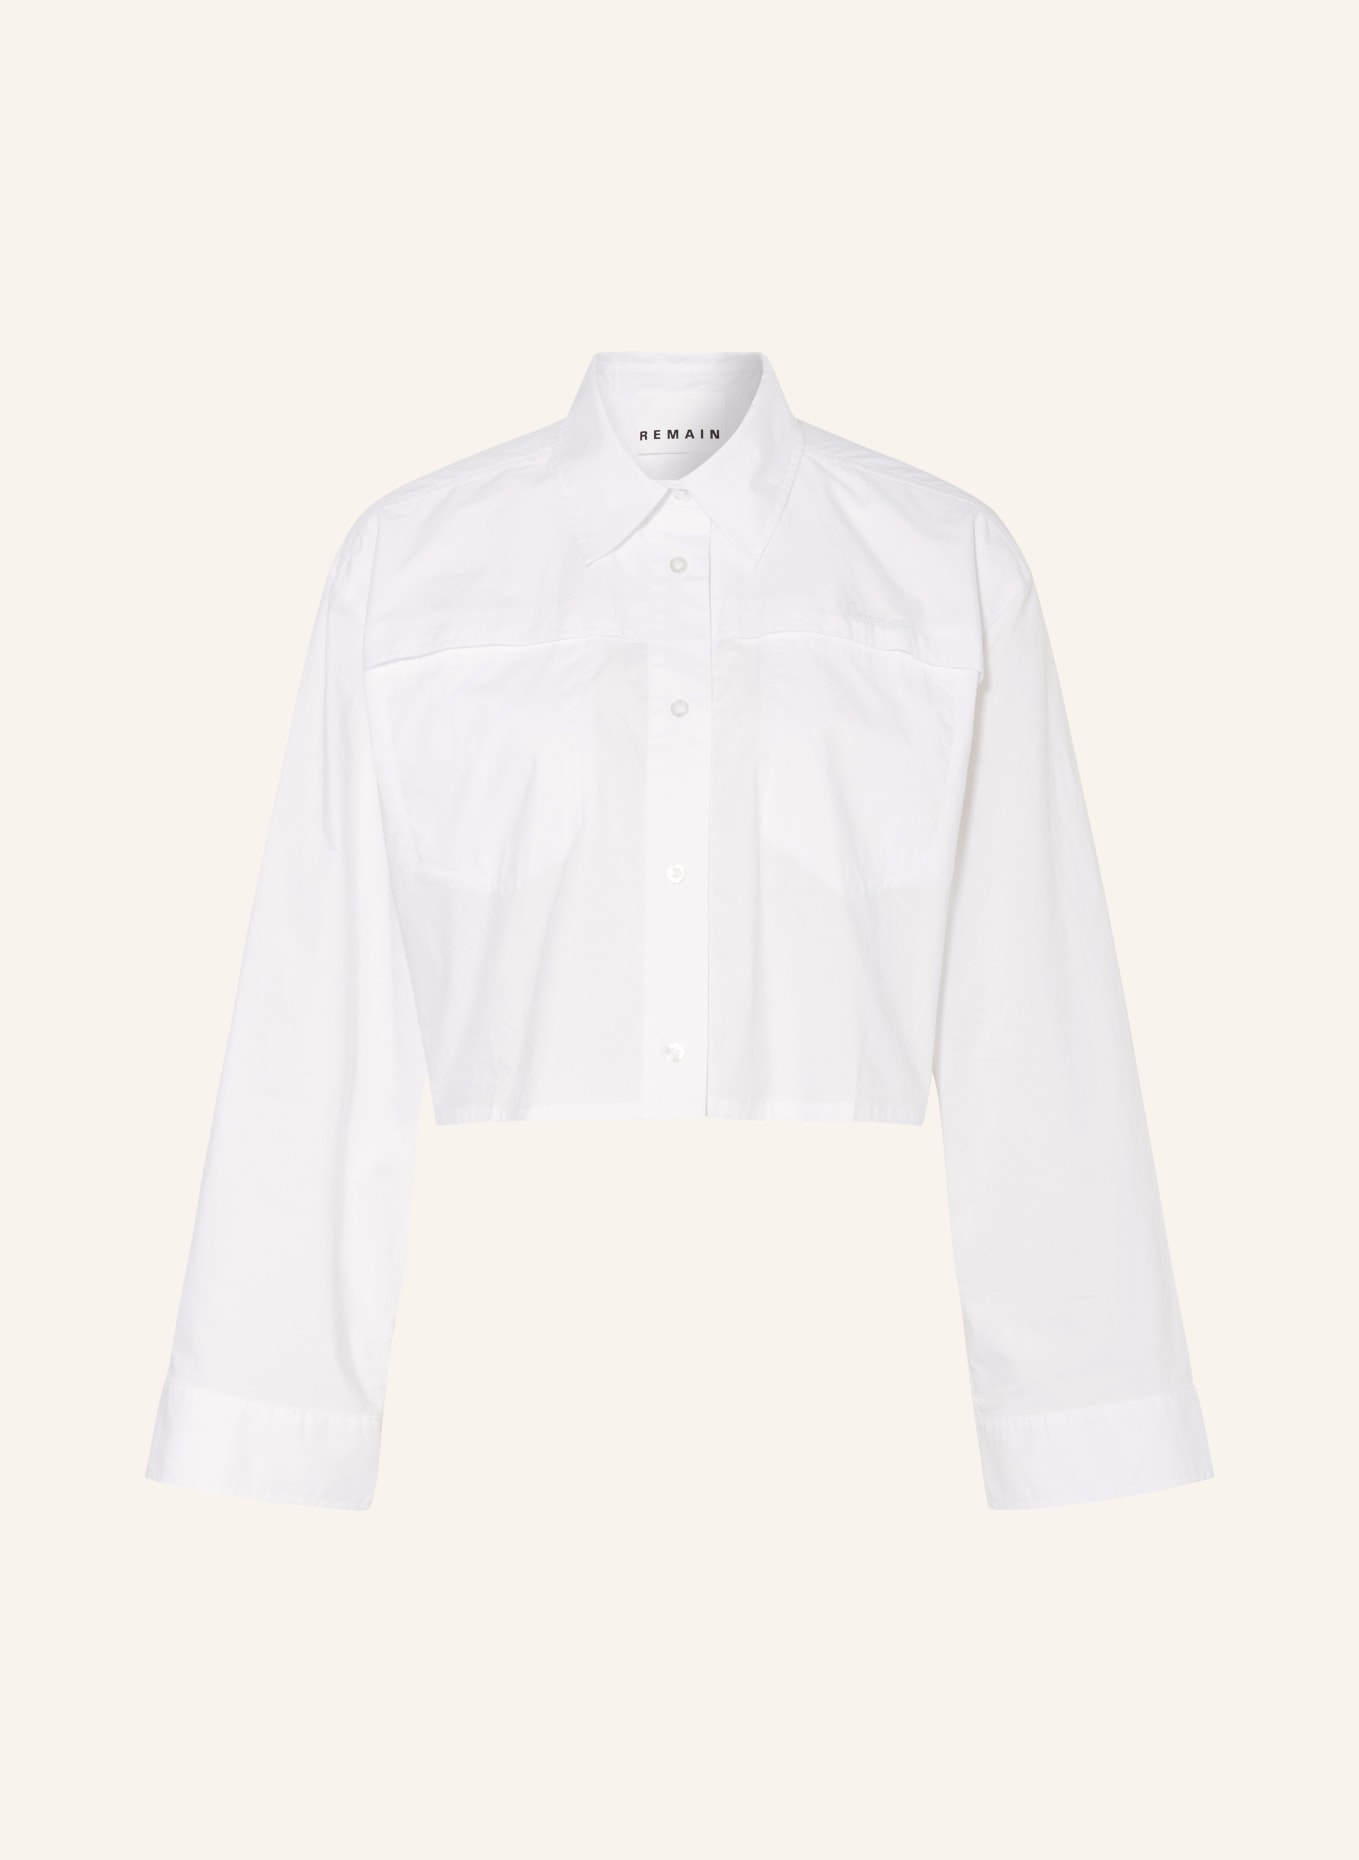 REMAIN Cropped shirt blouse, Color: WHITE (Image 1)